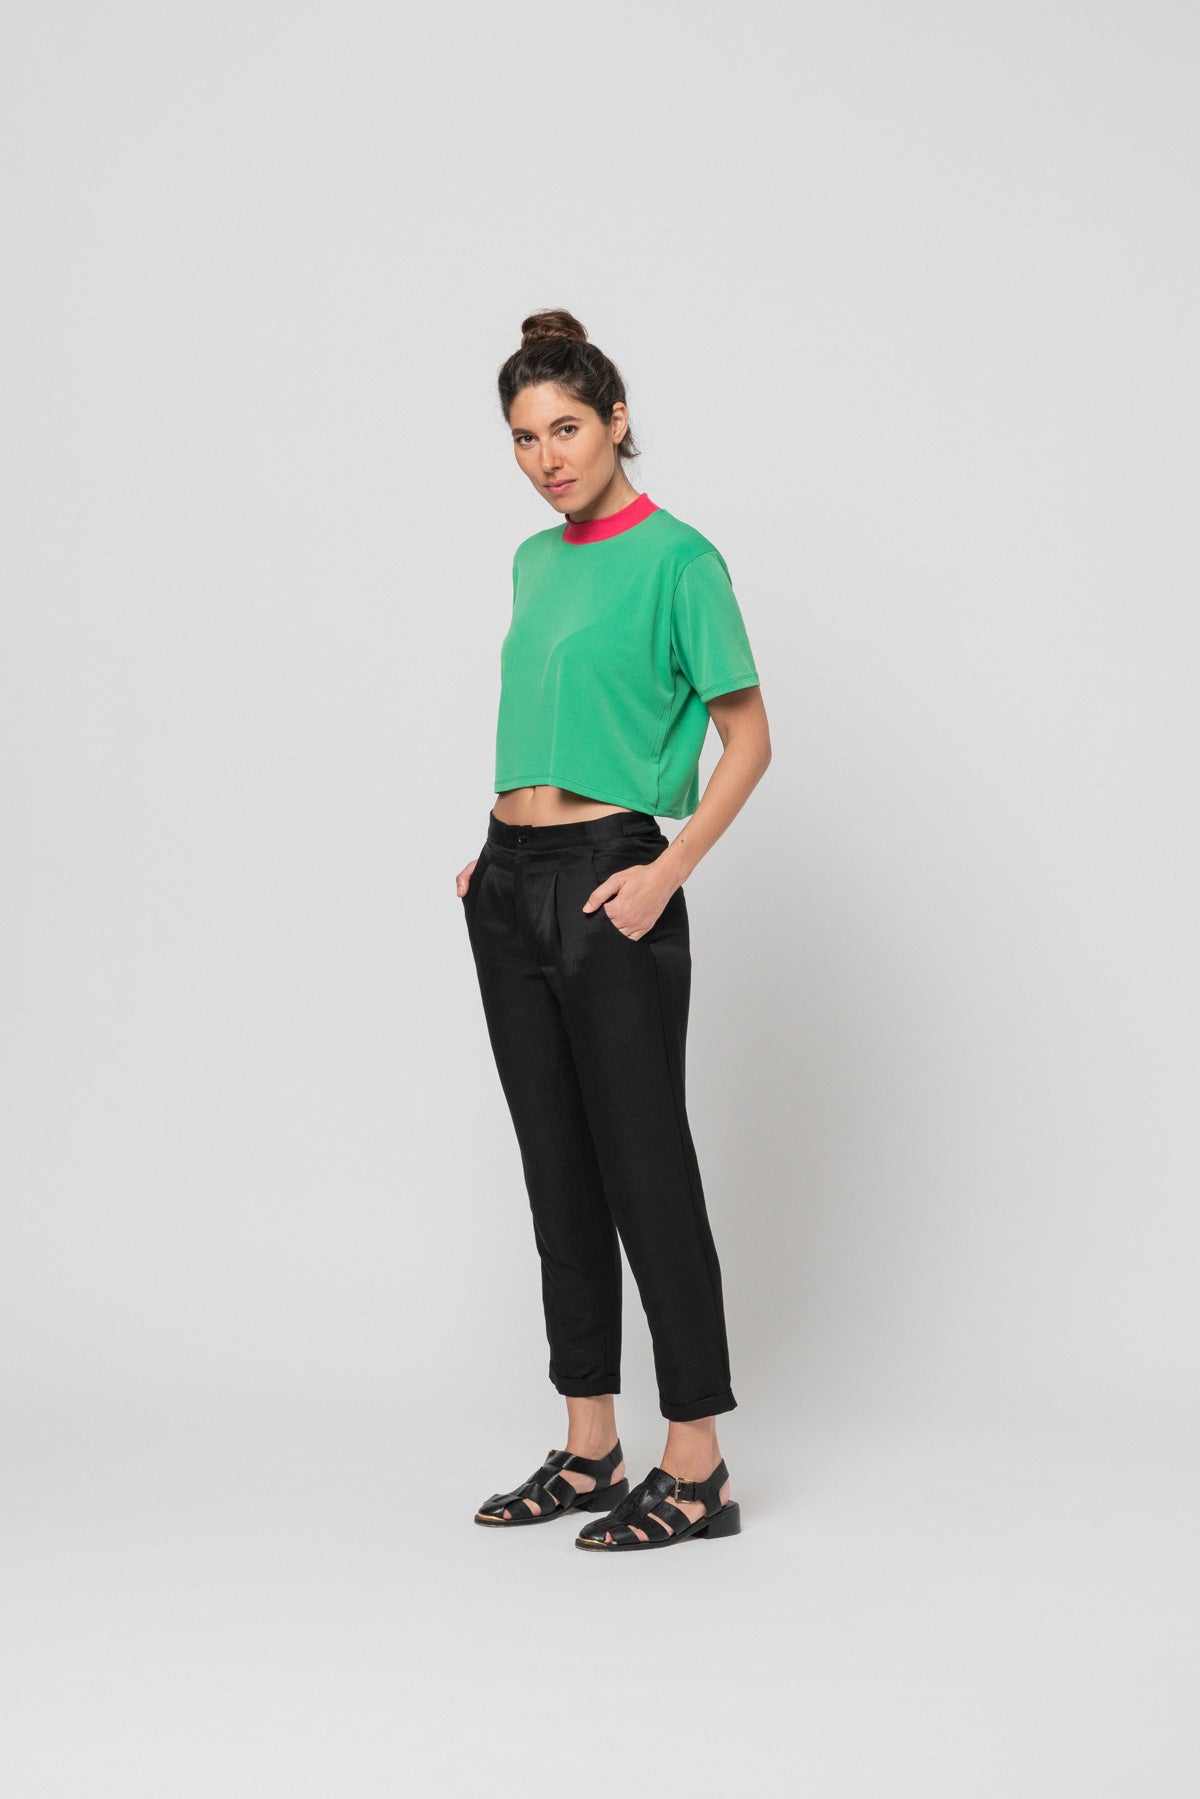 The Green Cropped T